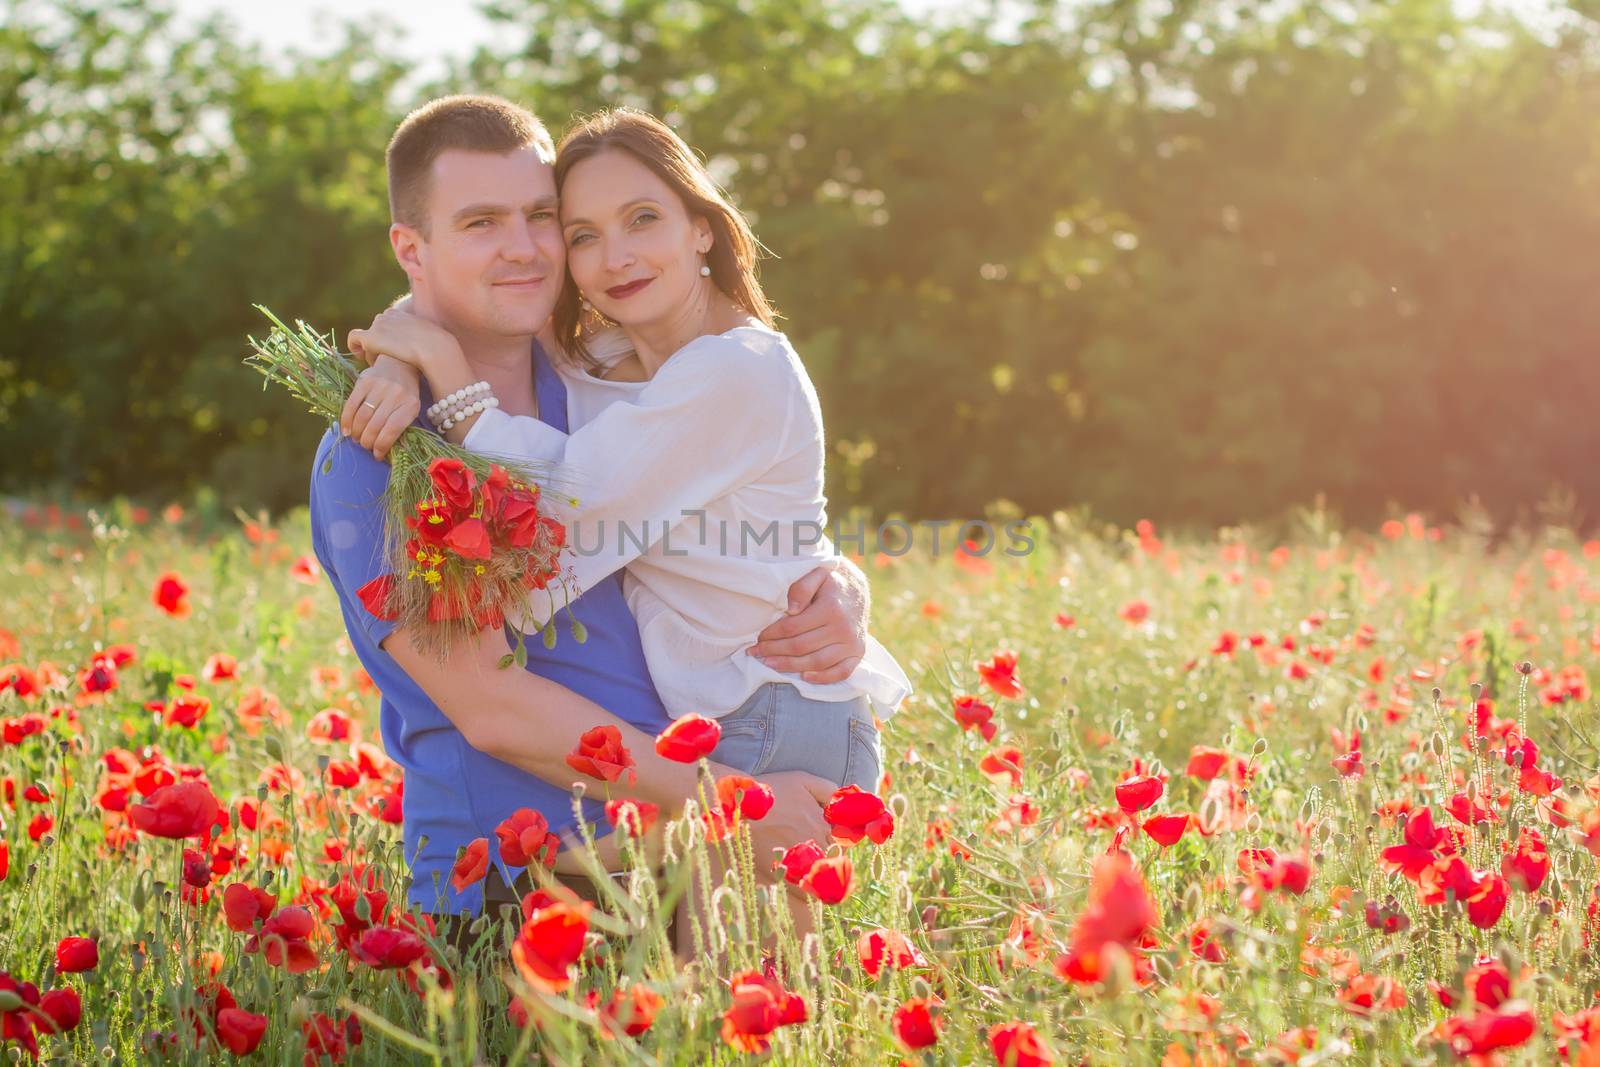 Couple among poppy field embracing and smiling nose-to-nose